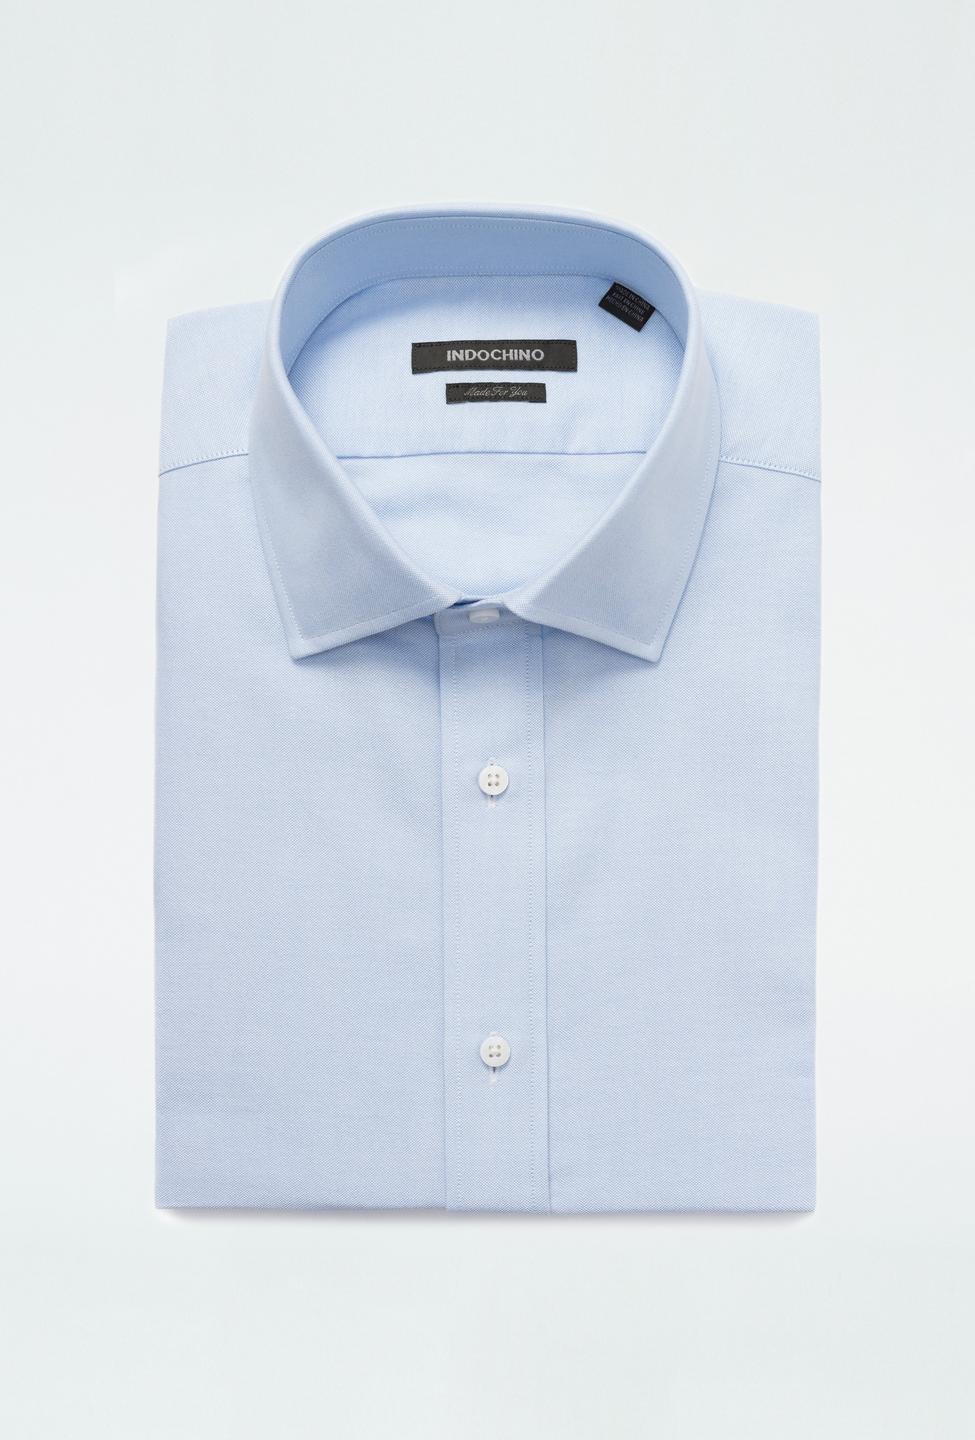 Blue shirt - Hartland Solid Design from Premium Indochino Collection